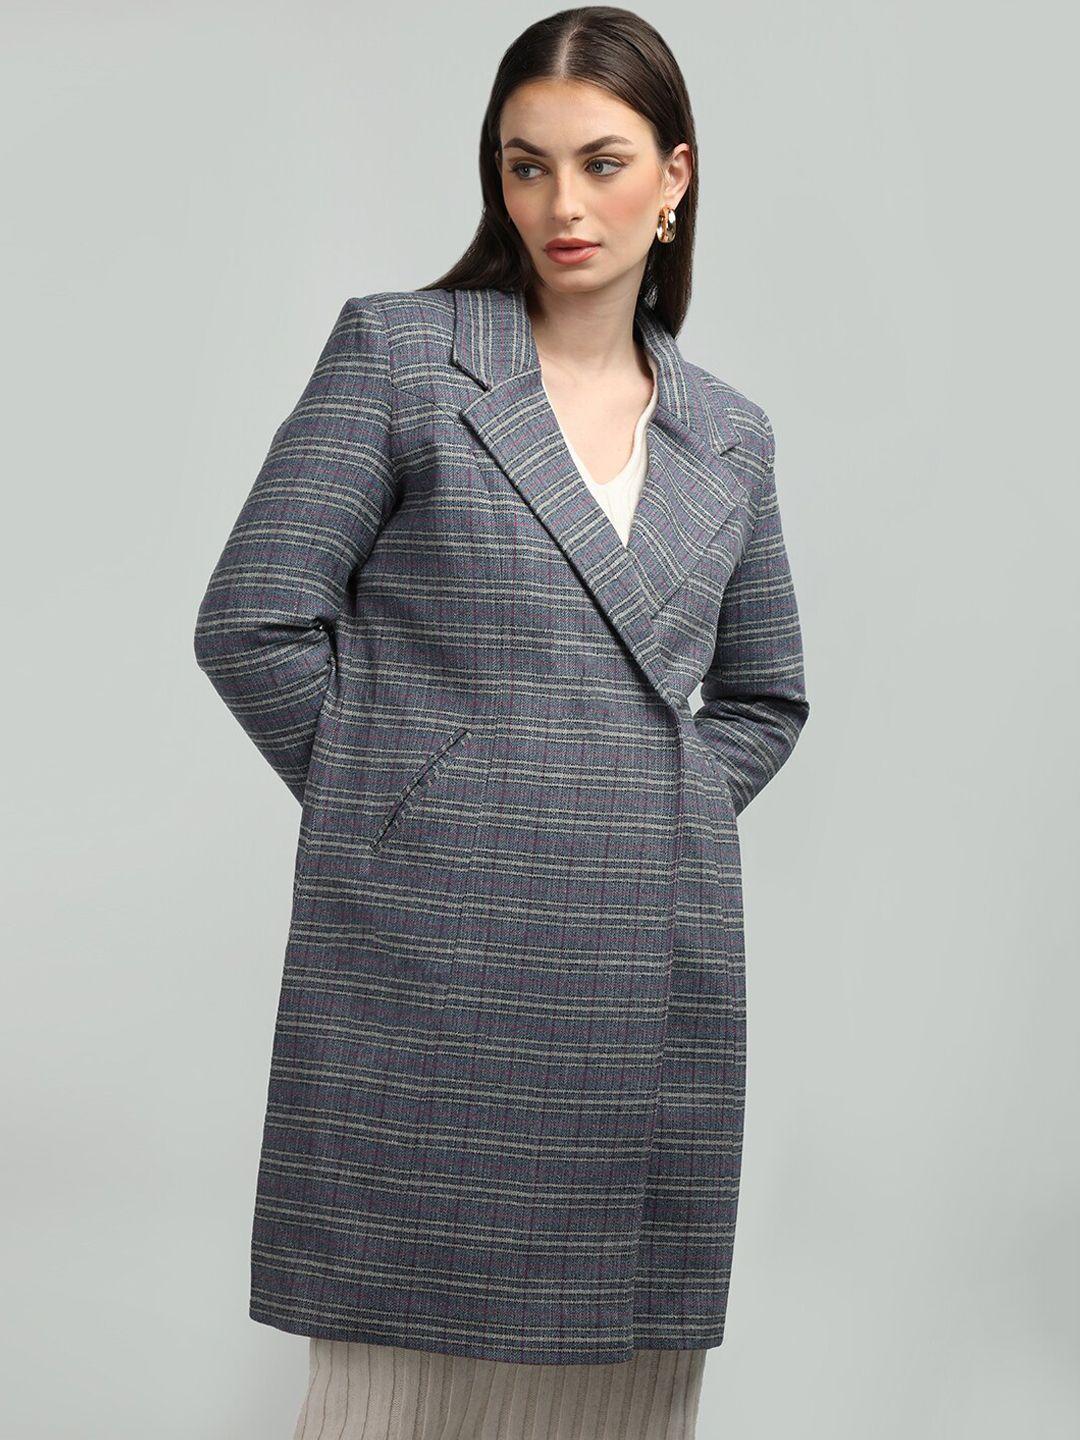 honnete checked notched lapel trench coat